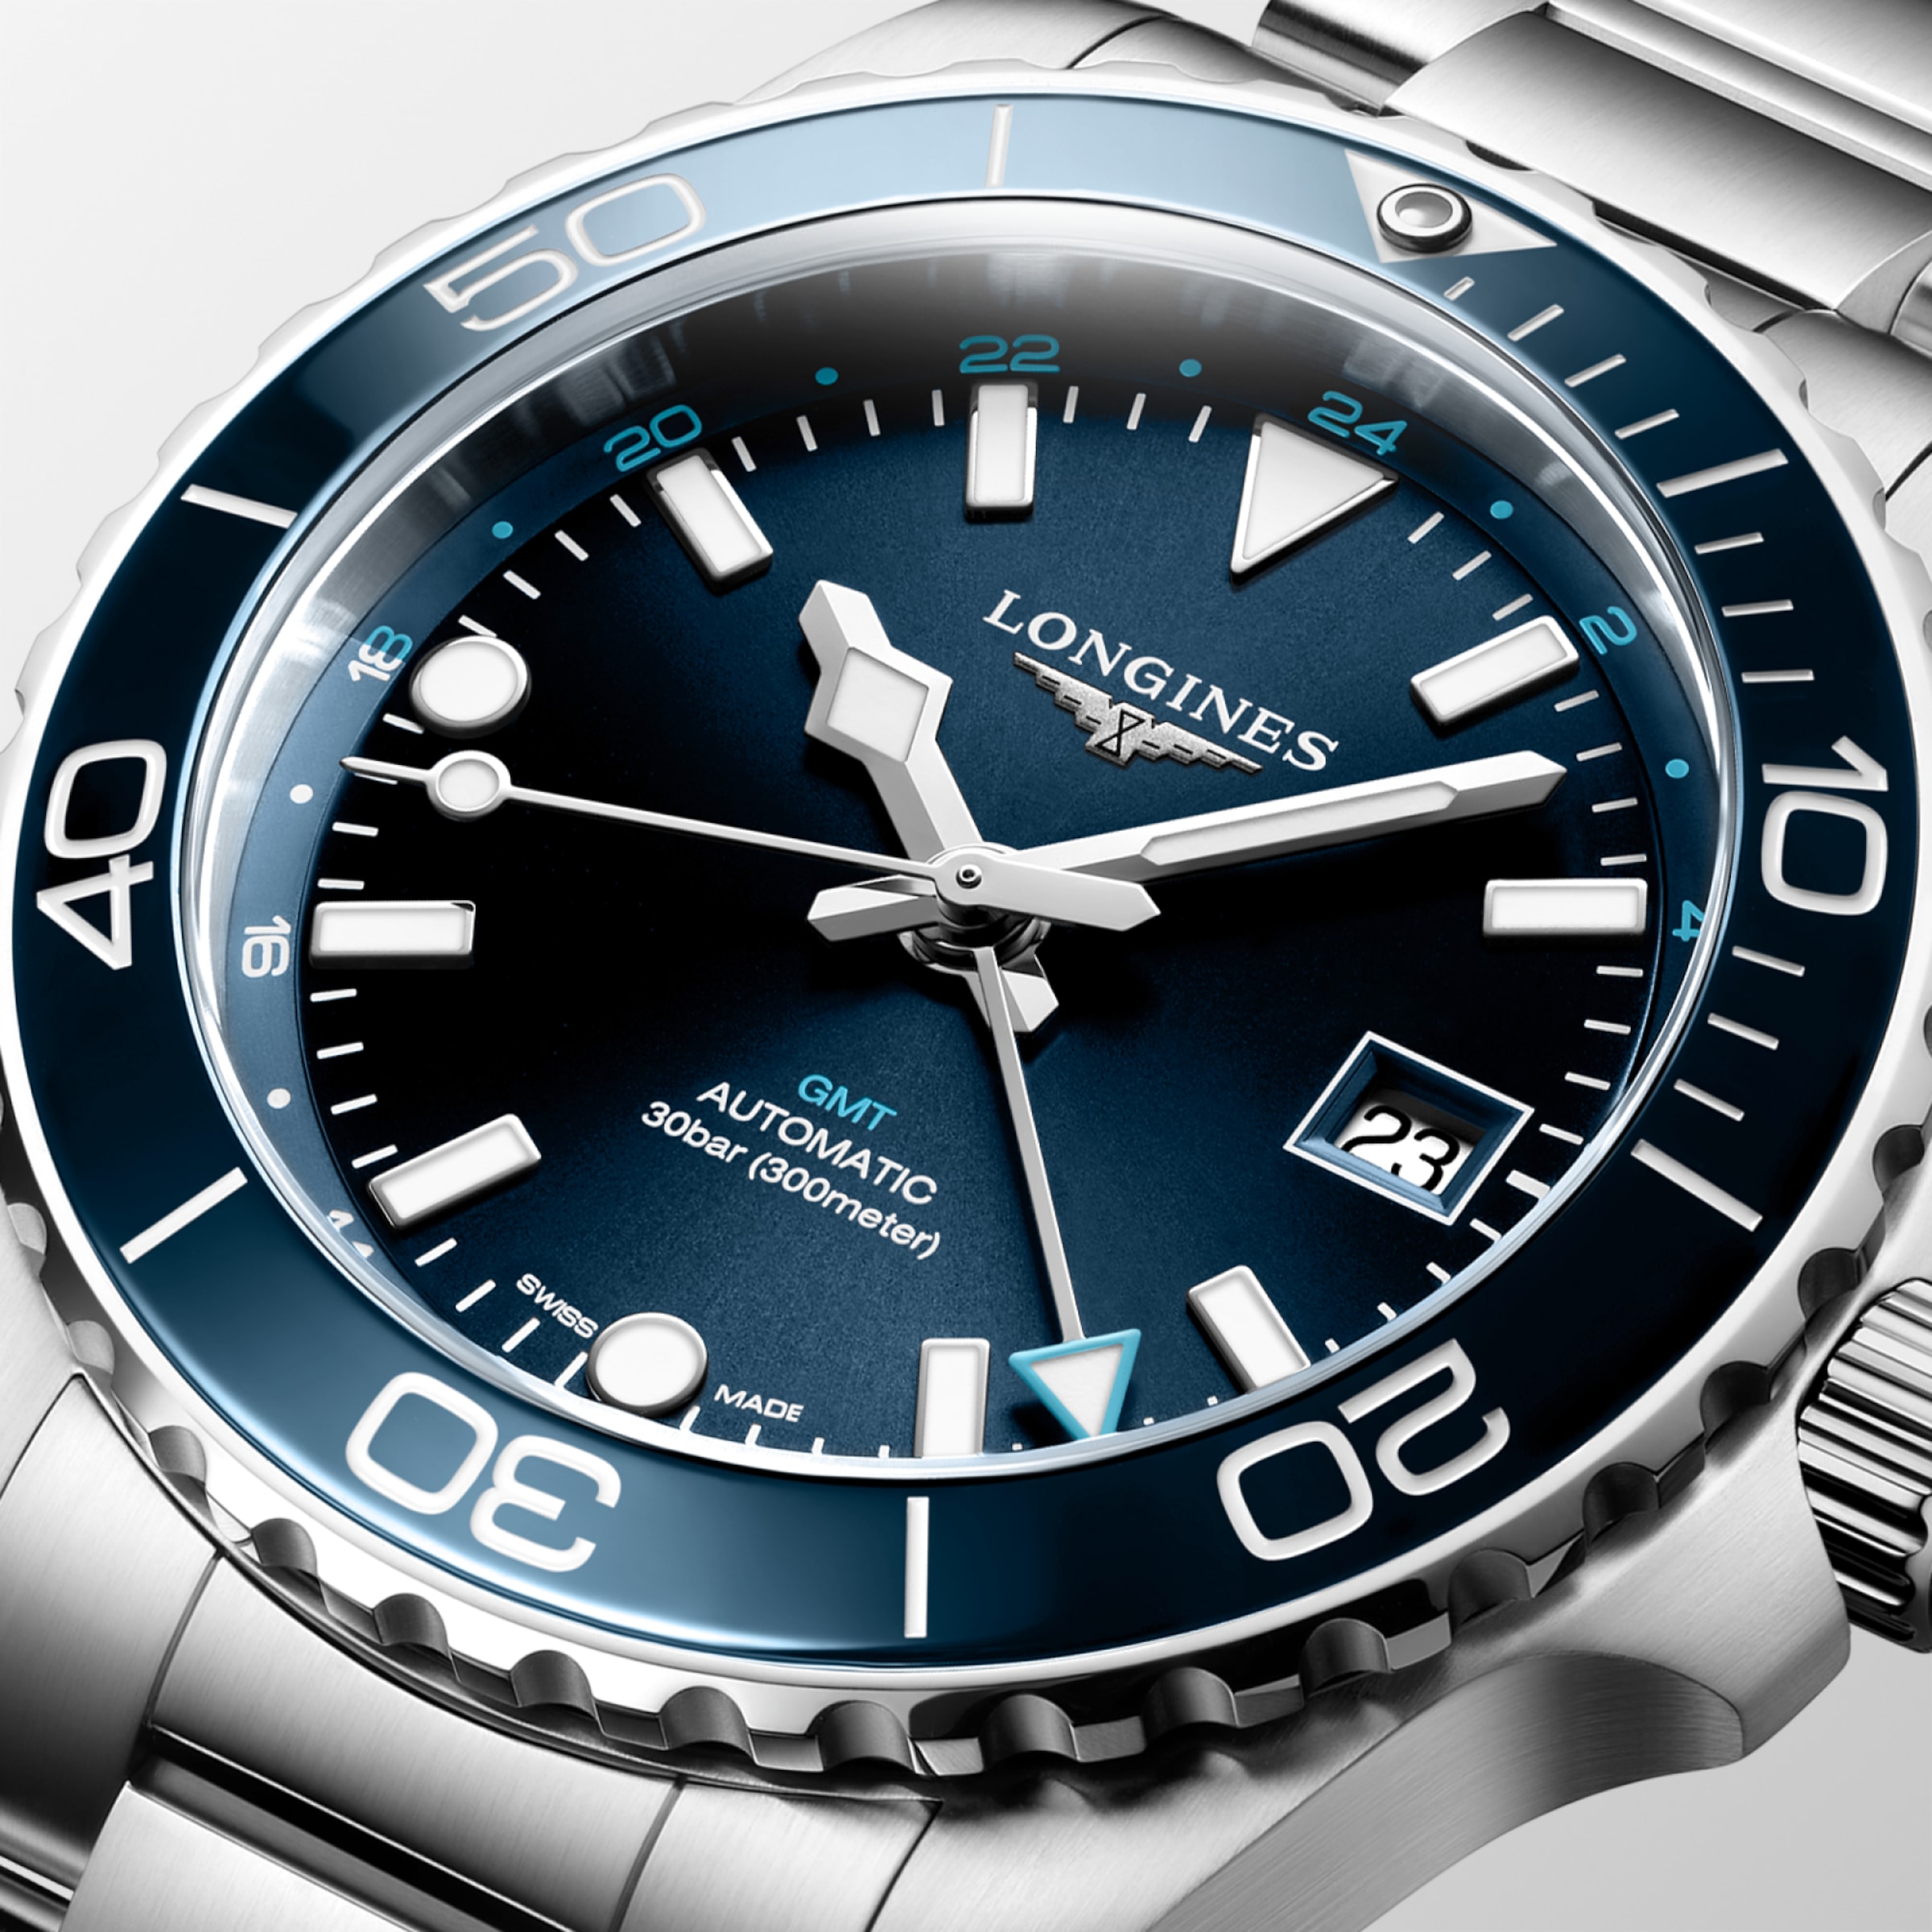 Longines HYDROCONQUEST Automatic Stainless steel and ceramic bezel Watch - L3.790.4.96.6